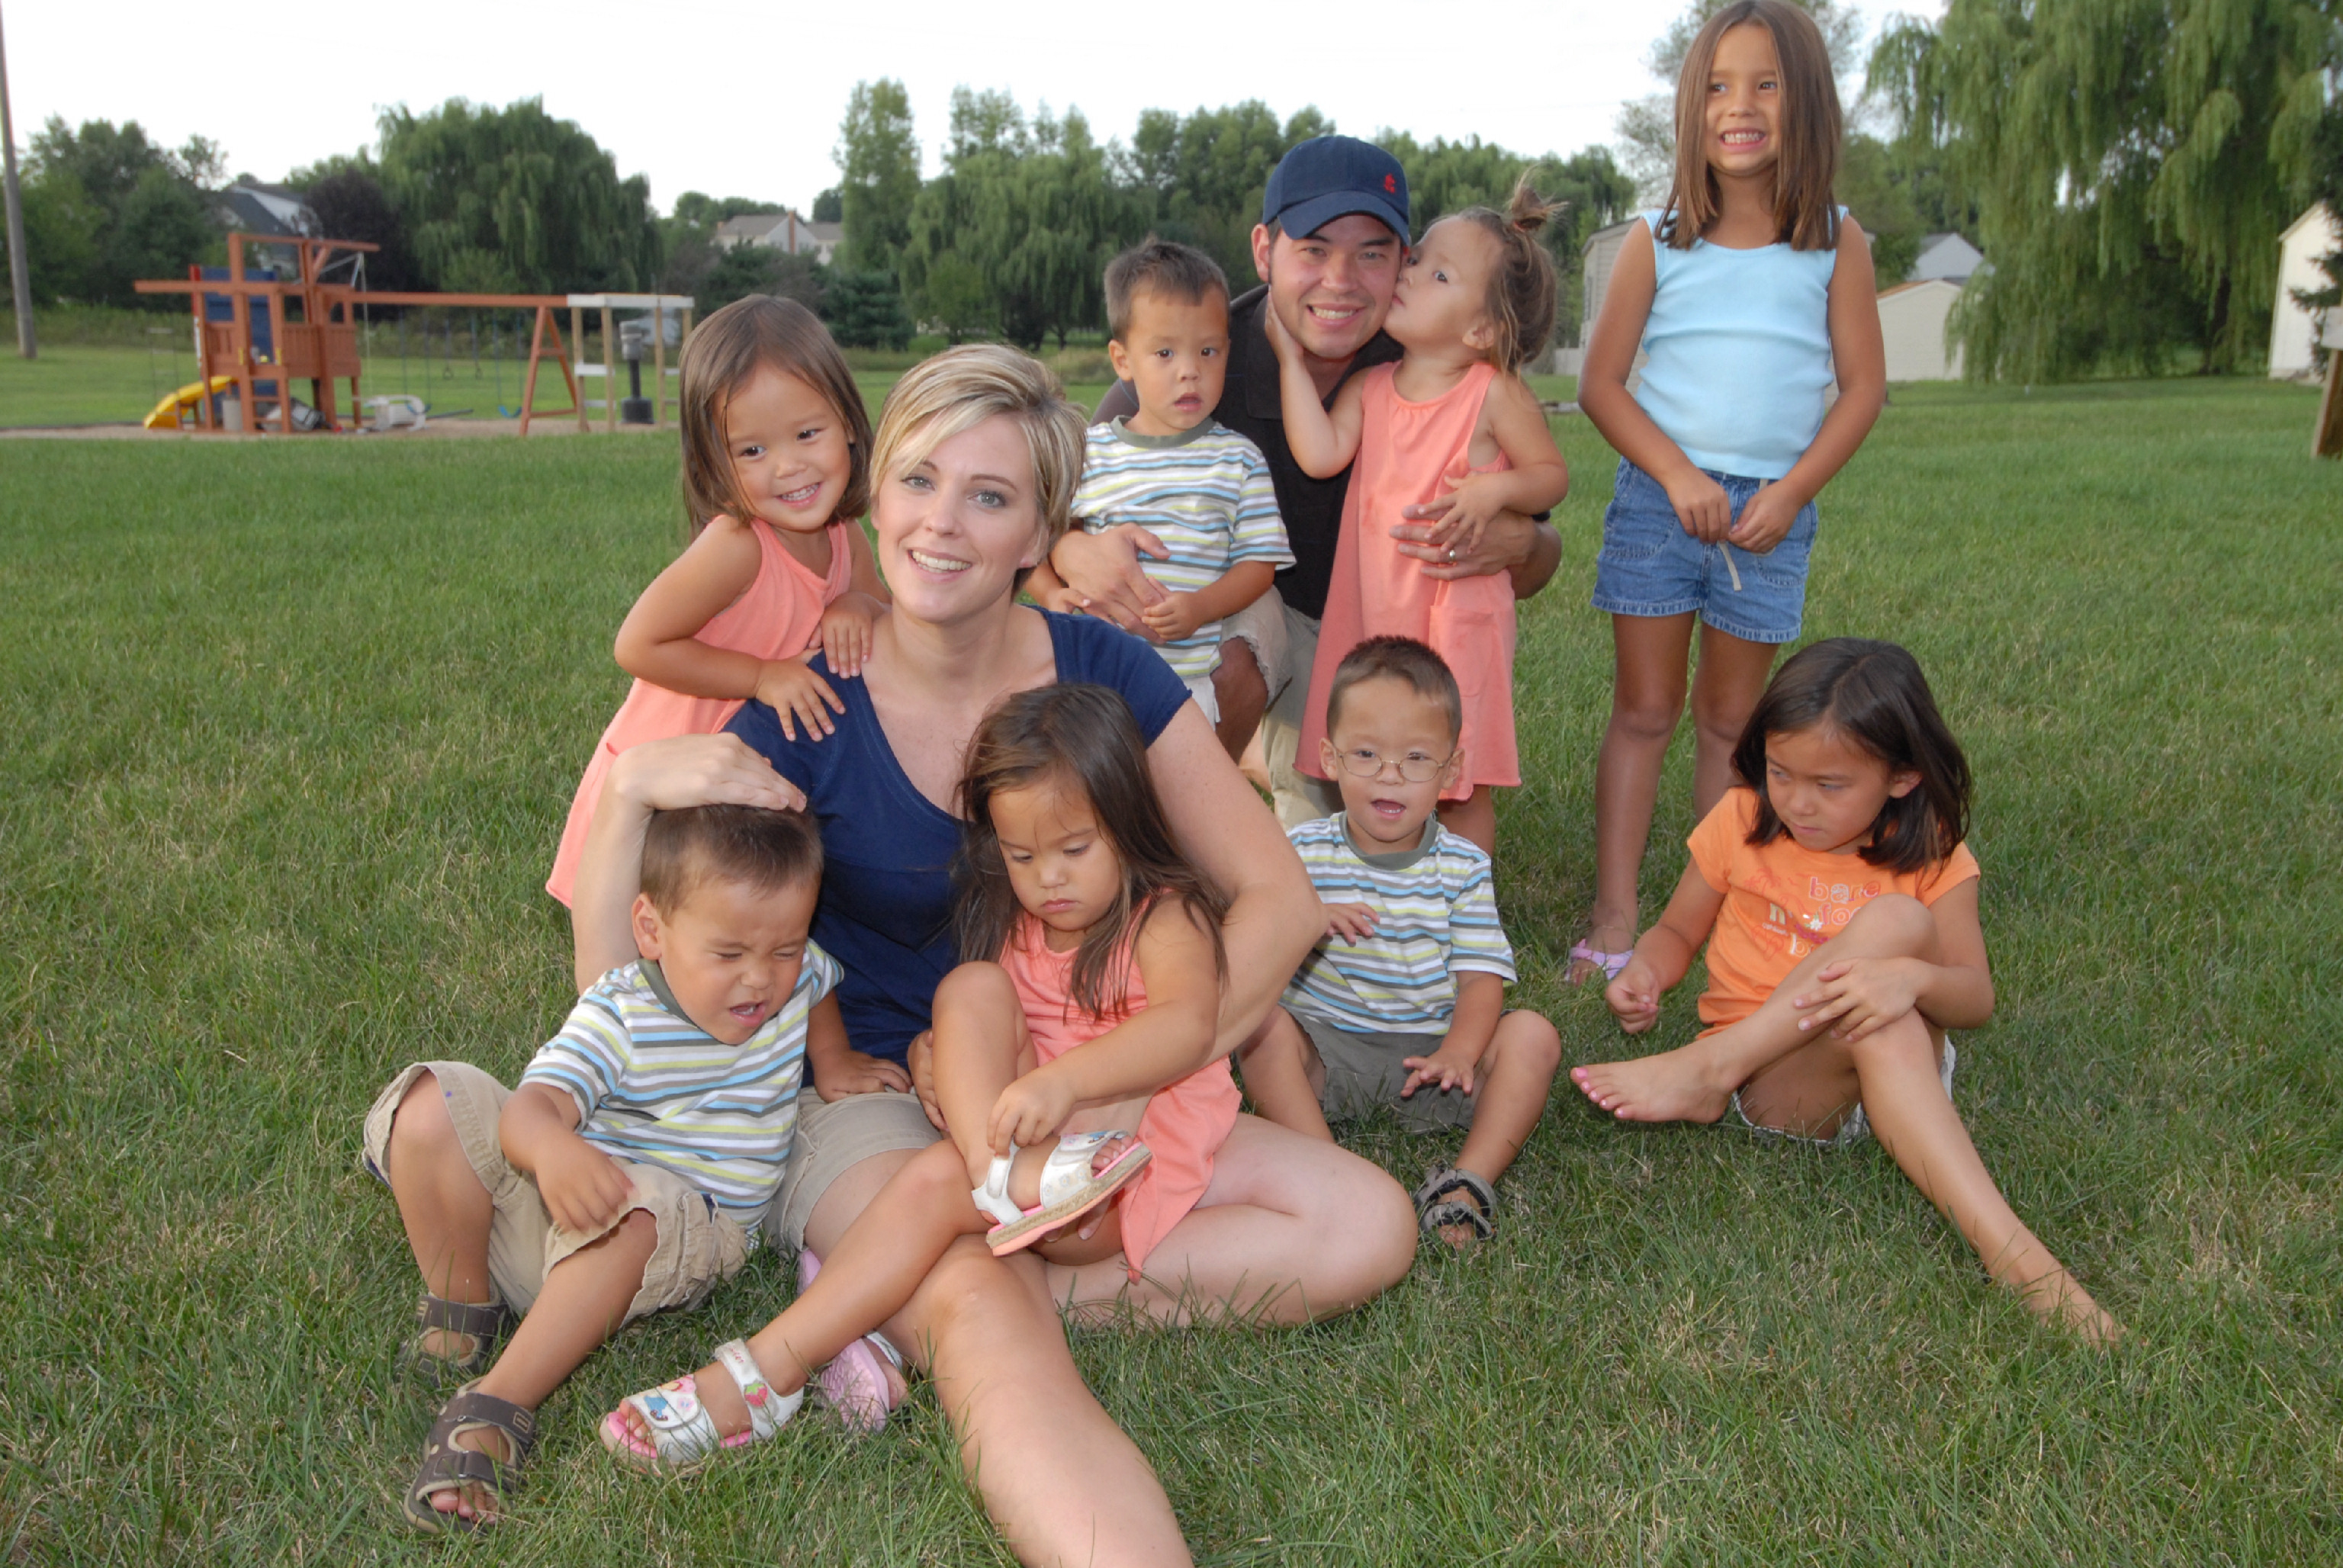 The former couple starred in Jon & Kate Plus 8 with their sextuplets and twins